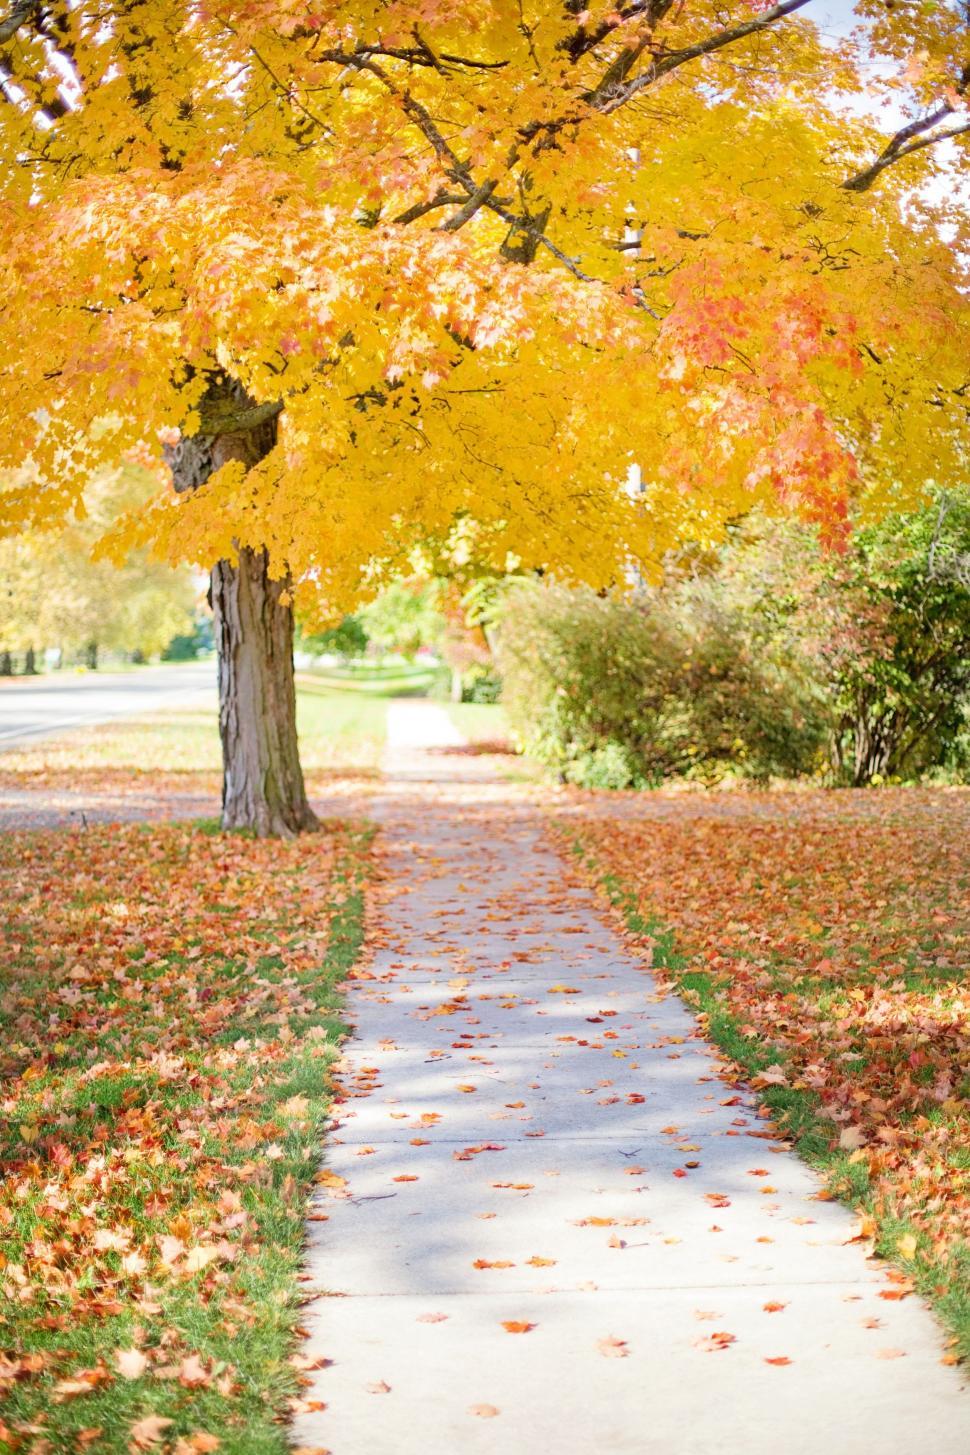 Free Image of Autumn Leaves and Walkway 